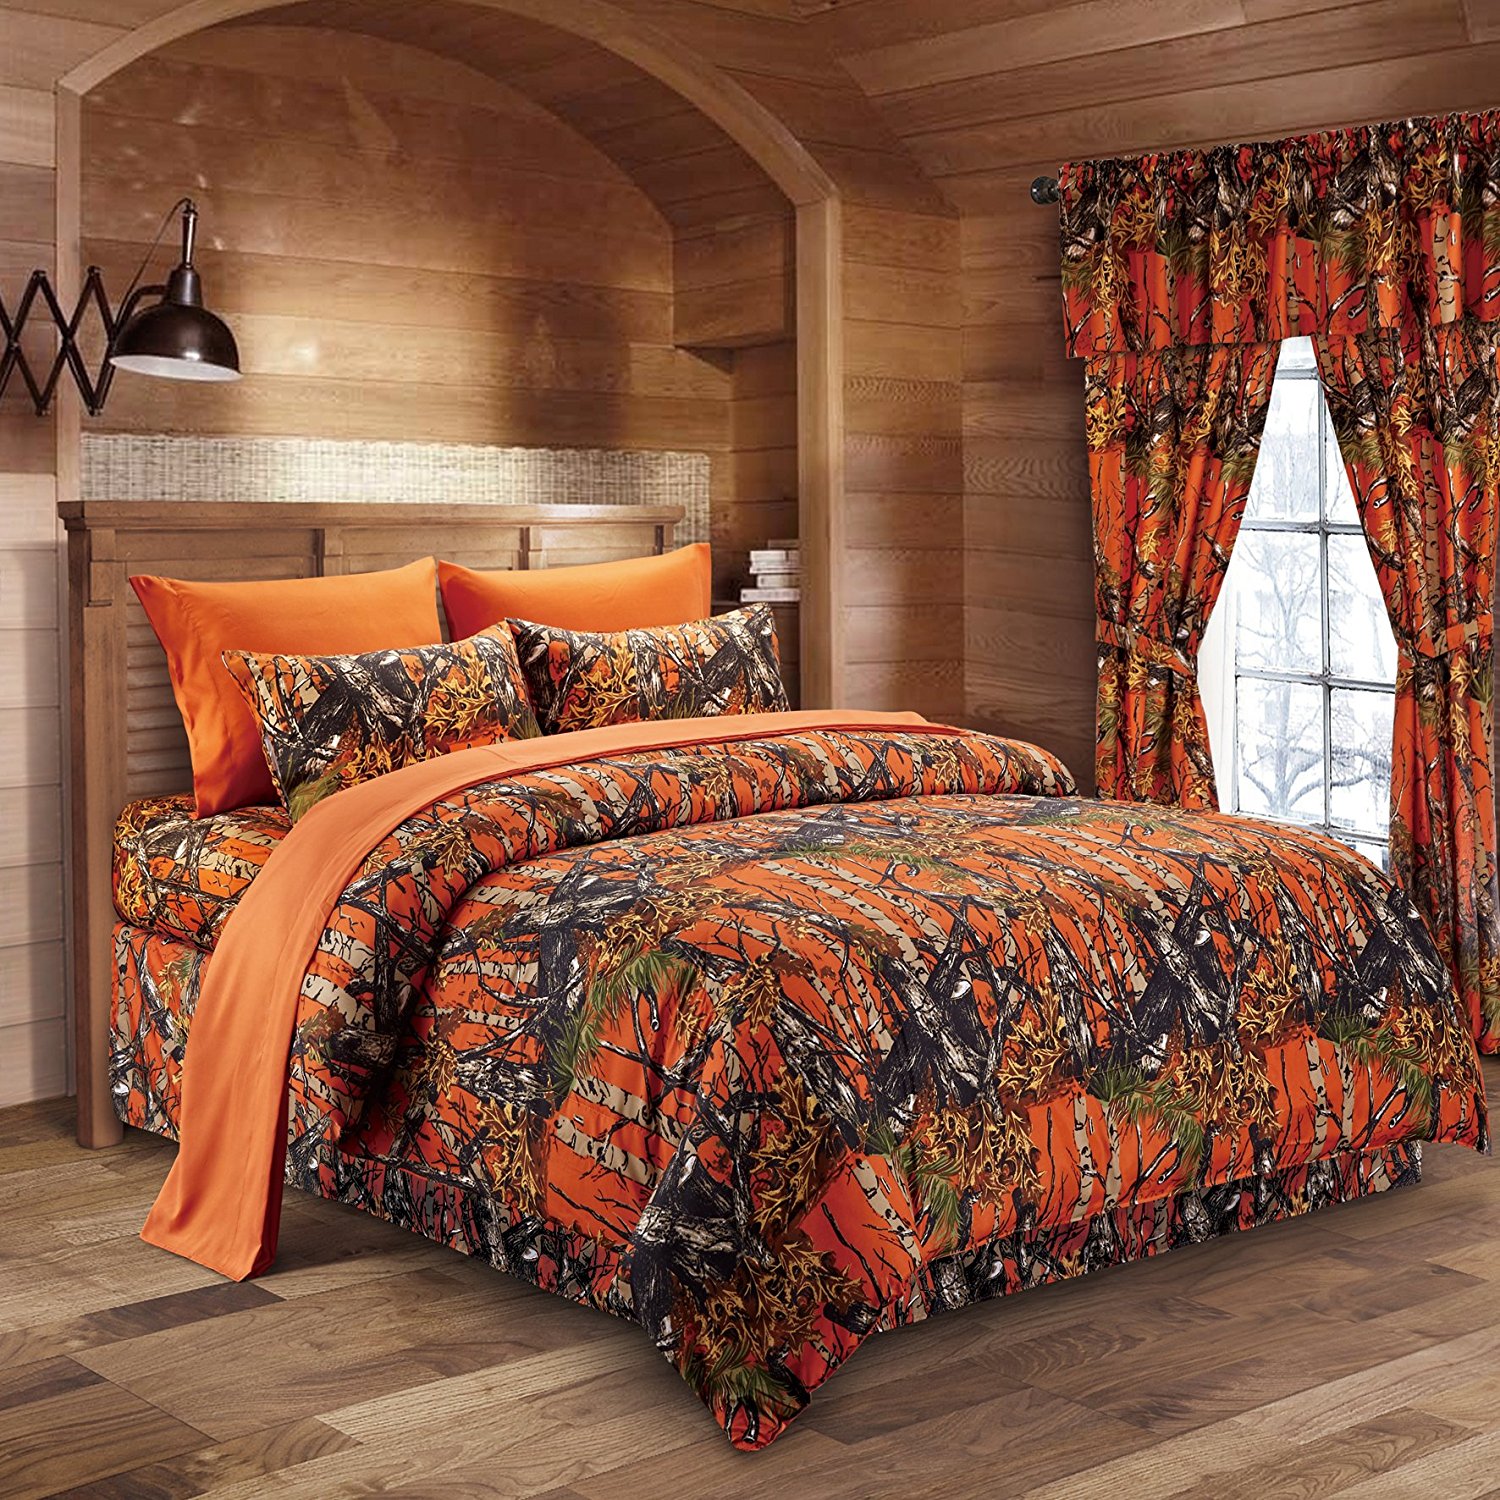 Bedding 7 Pc Camo Set Mixed Size And Color Comforters Bedding